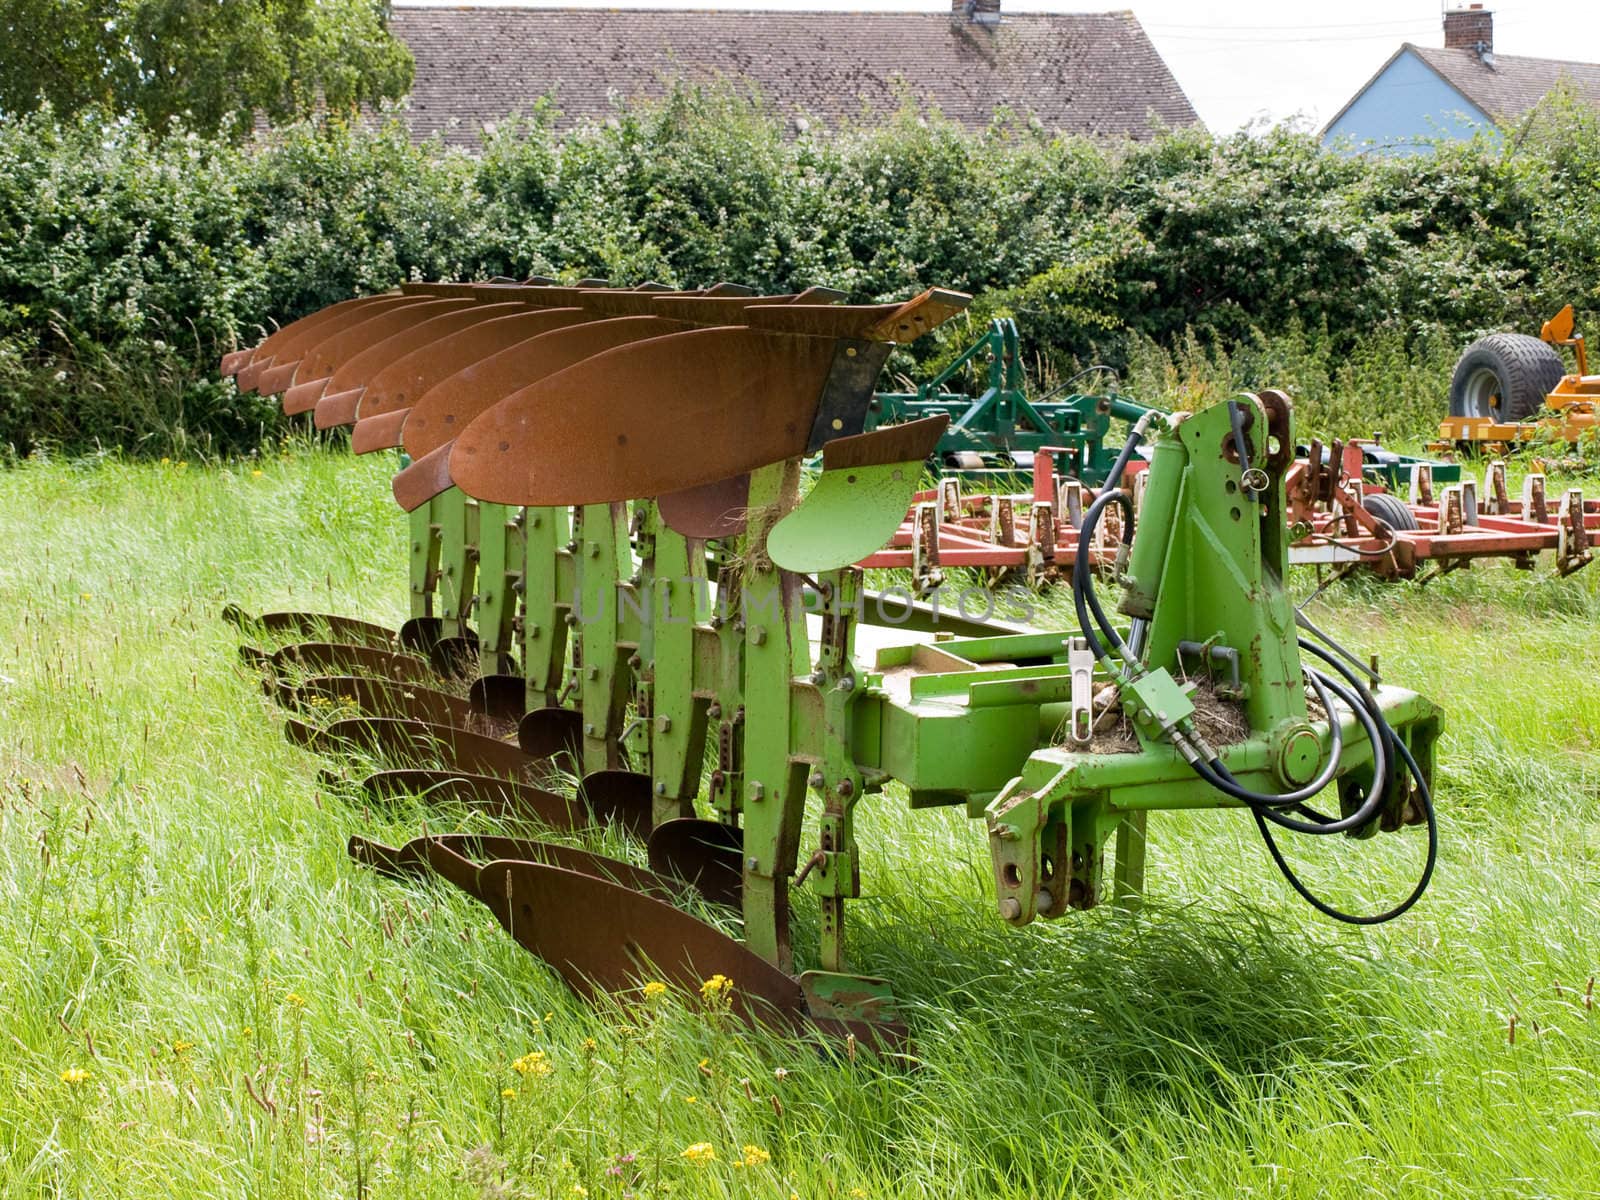 An old plough in a grass field